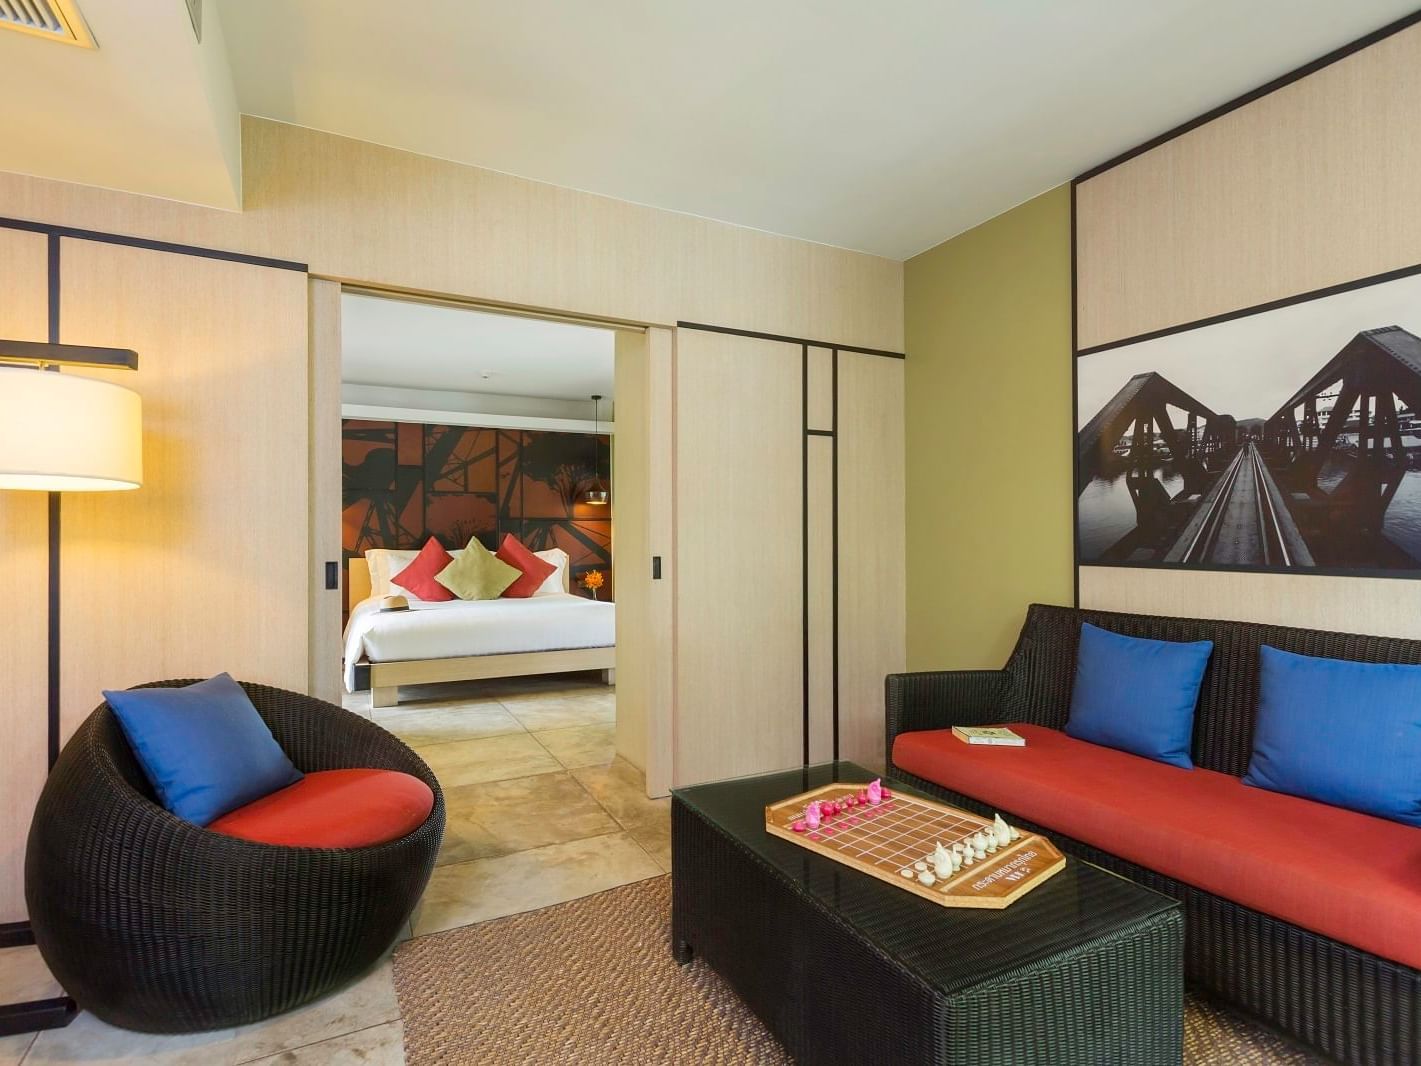 Room with common room at U Hotels and Resorts